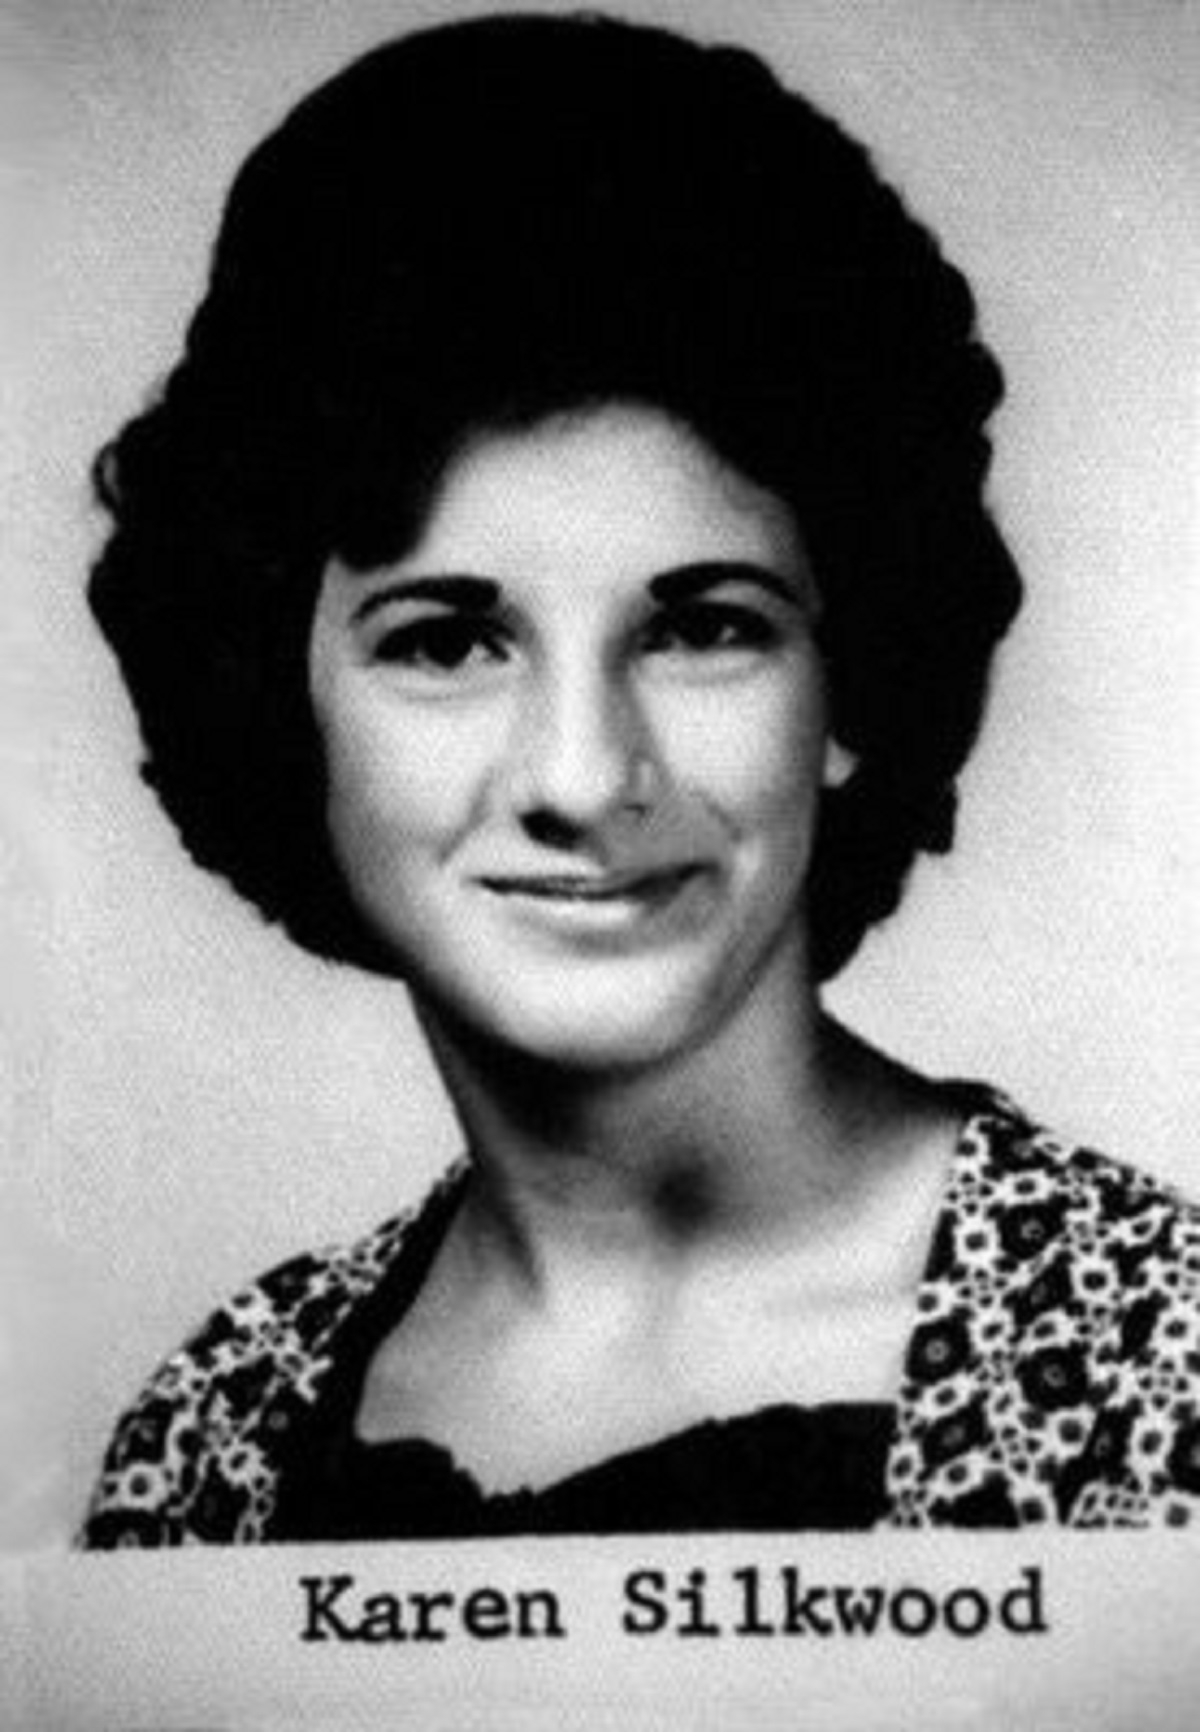 Karen Gay Silkwood (February 19, 1946 – November 13, 1974) was an American chemical technician and labor union activist known for raising concerns about corporate practices related to health and safety in a nuclear facility.After testifying to the Atomic Energy Commission about her concerns, she was found to have plutonium contamination on her body and in her home. While driving to meet with a New York Times journalist and an official of her union's national office, she died in a car crash under unclear circumstances.